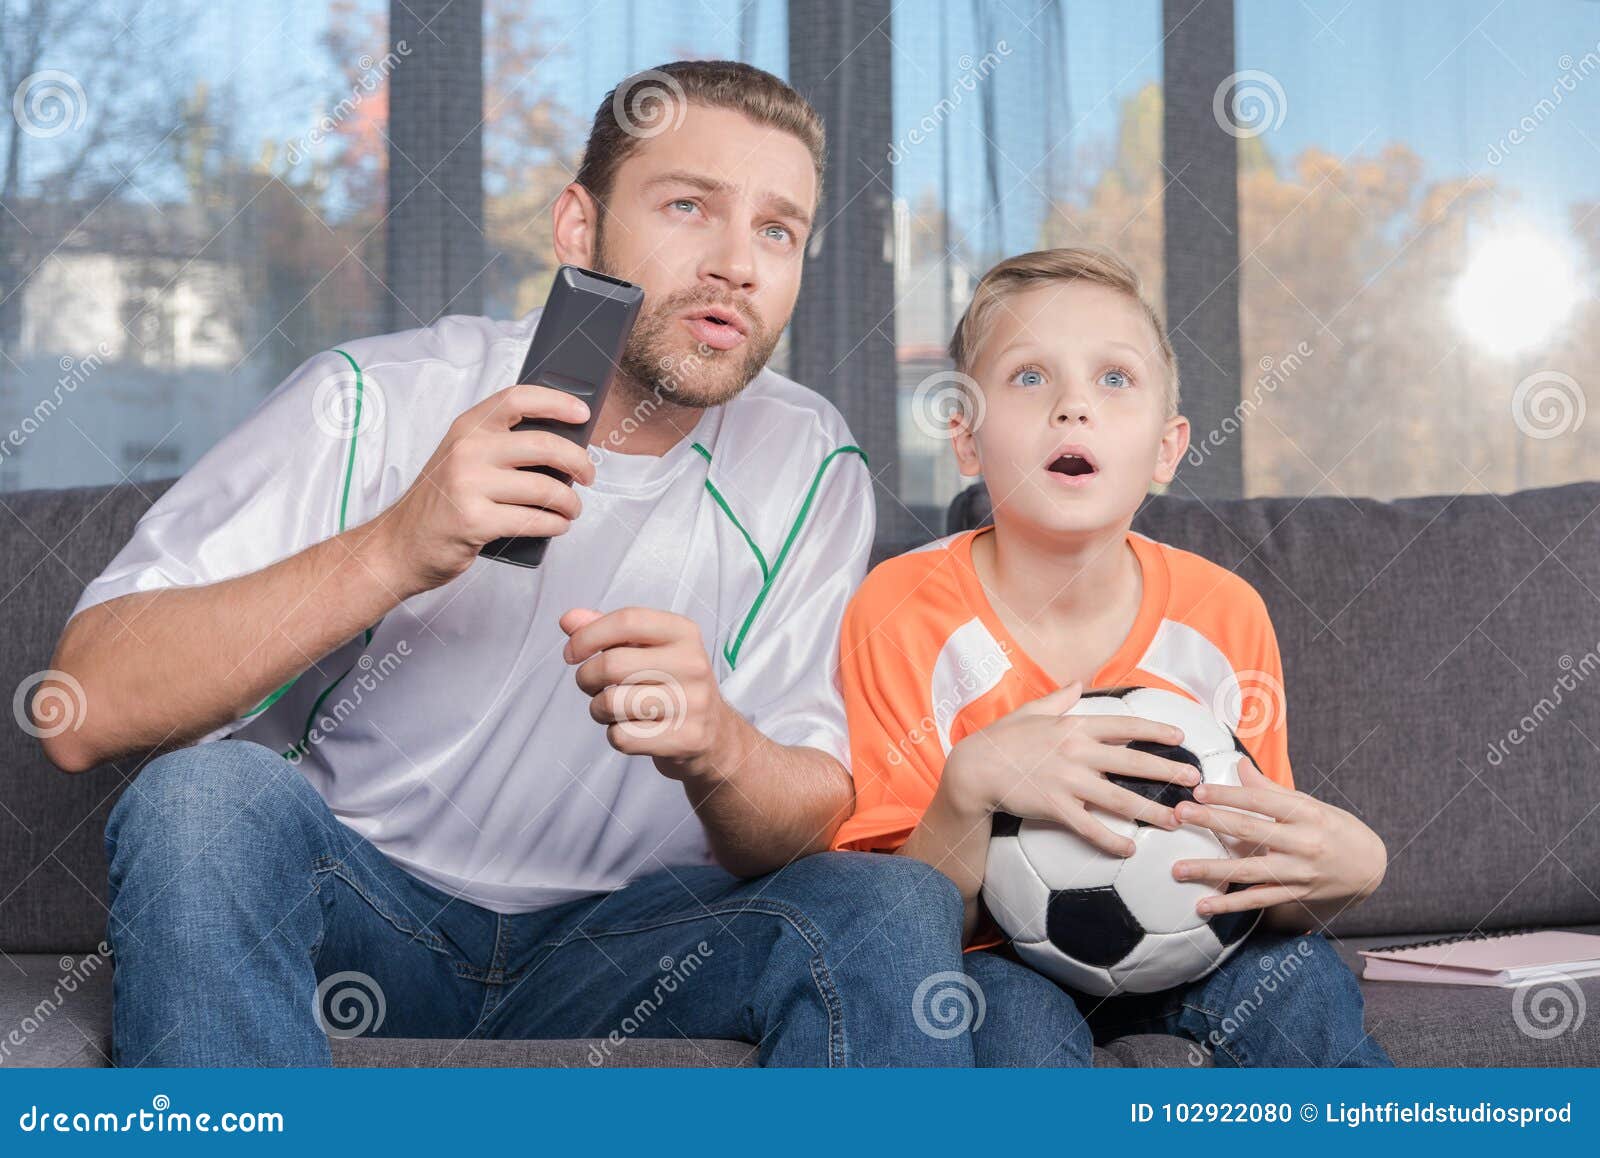 Father and Son Watching Soccer Match Stock Photo - Image of match